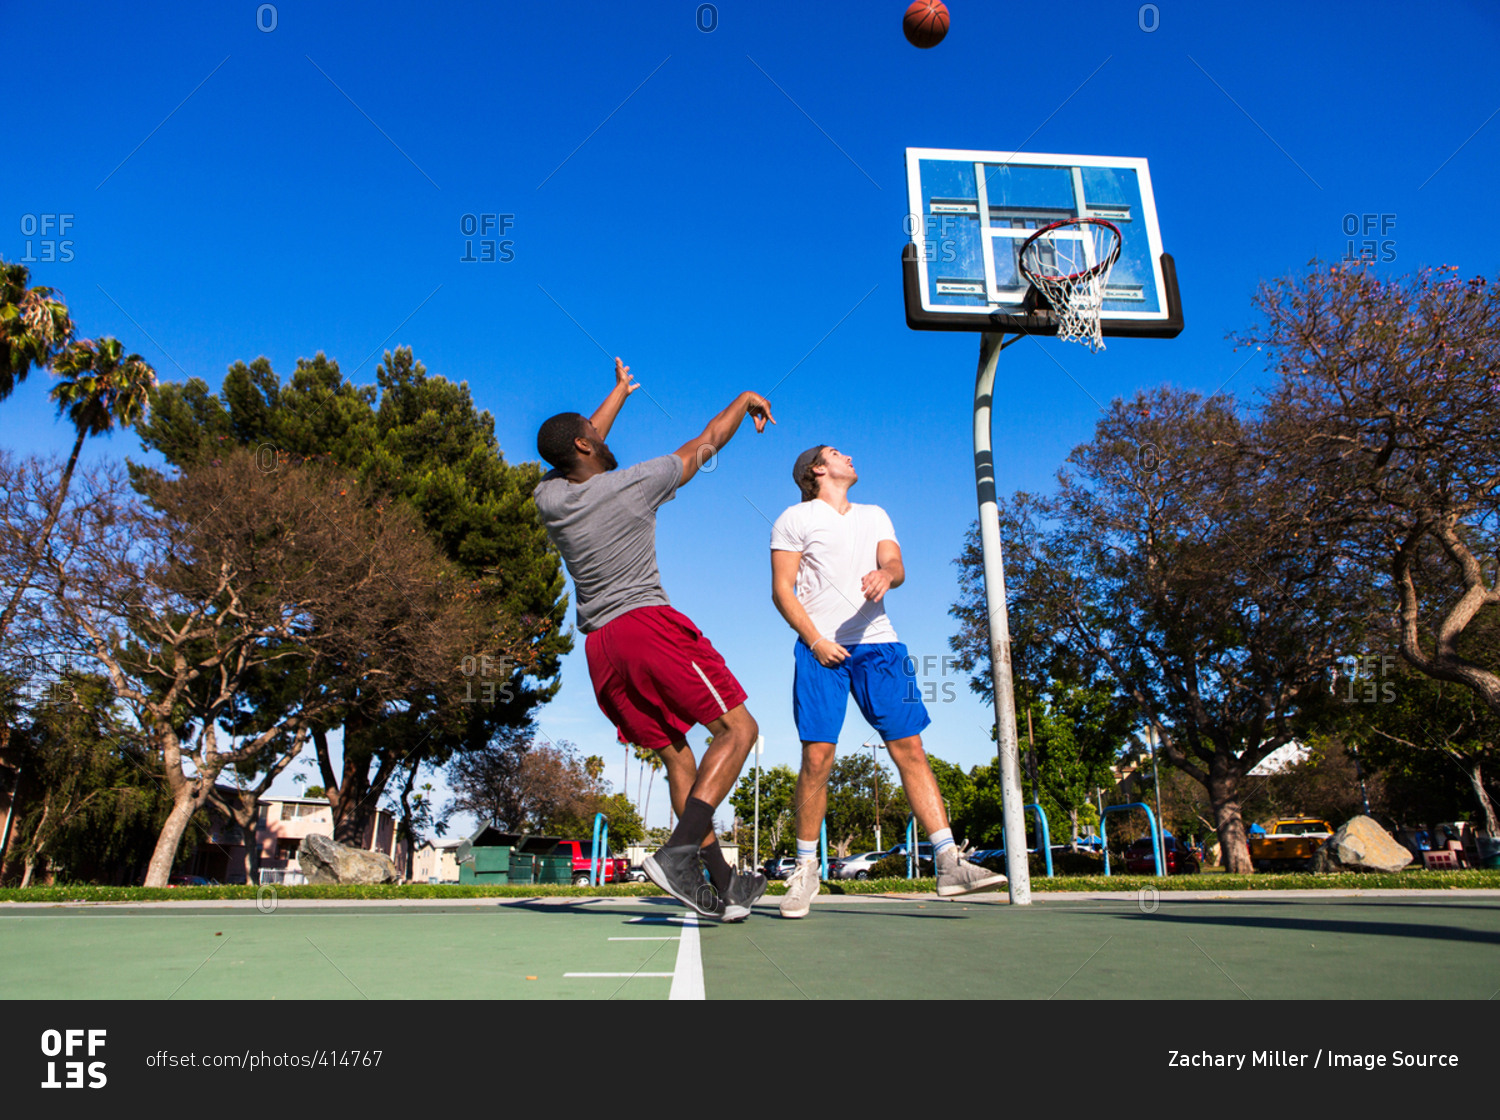 Young man throwing basketball towards basketball net on outdoor court